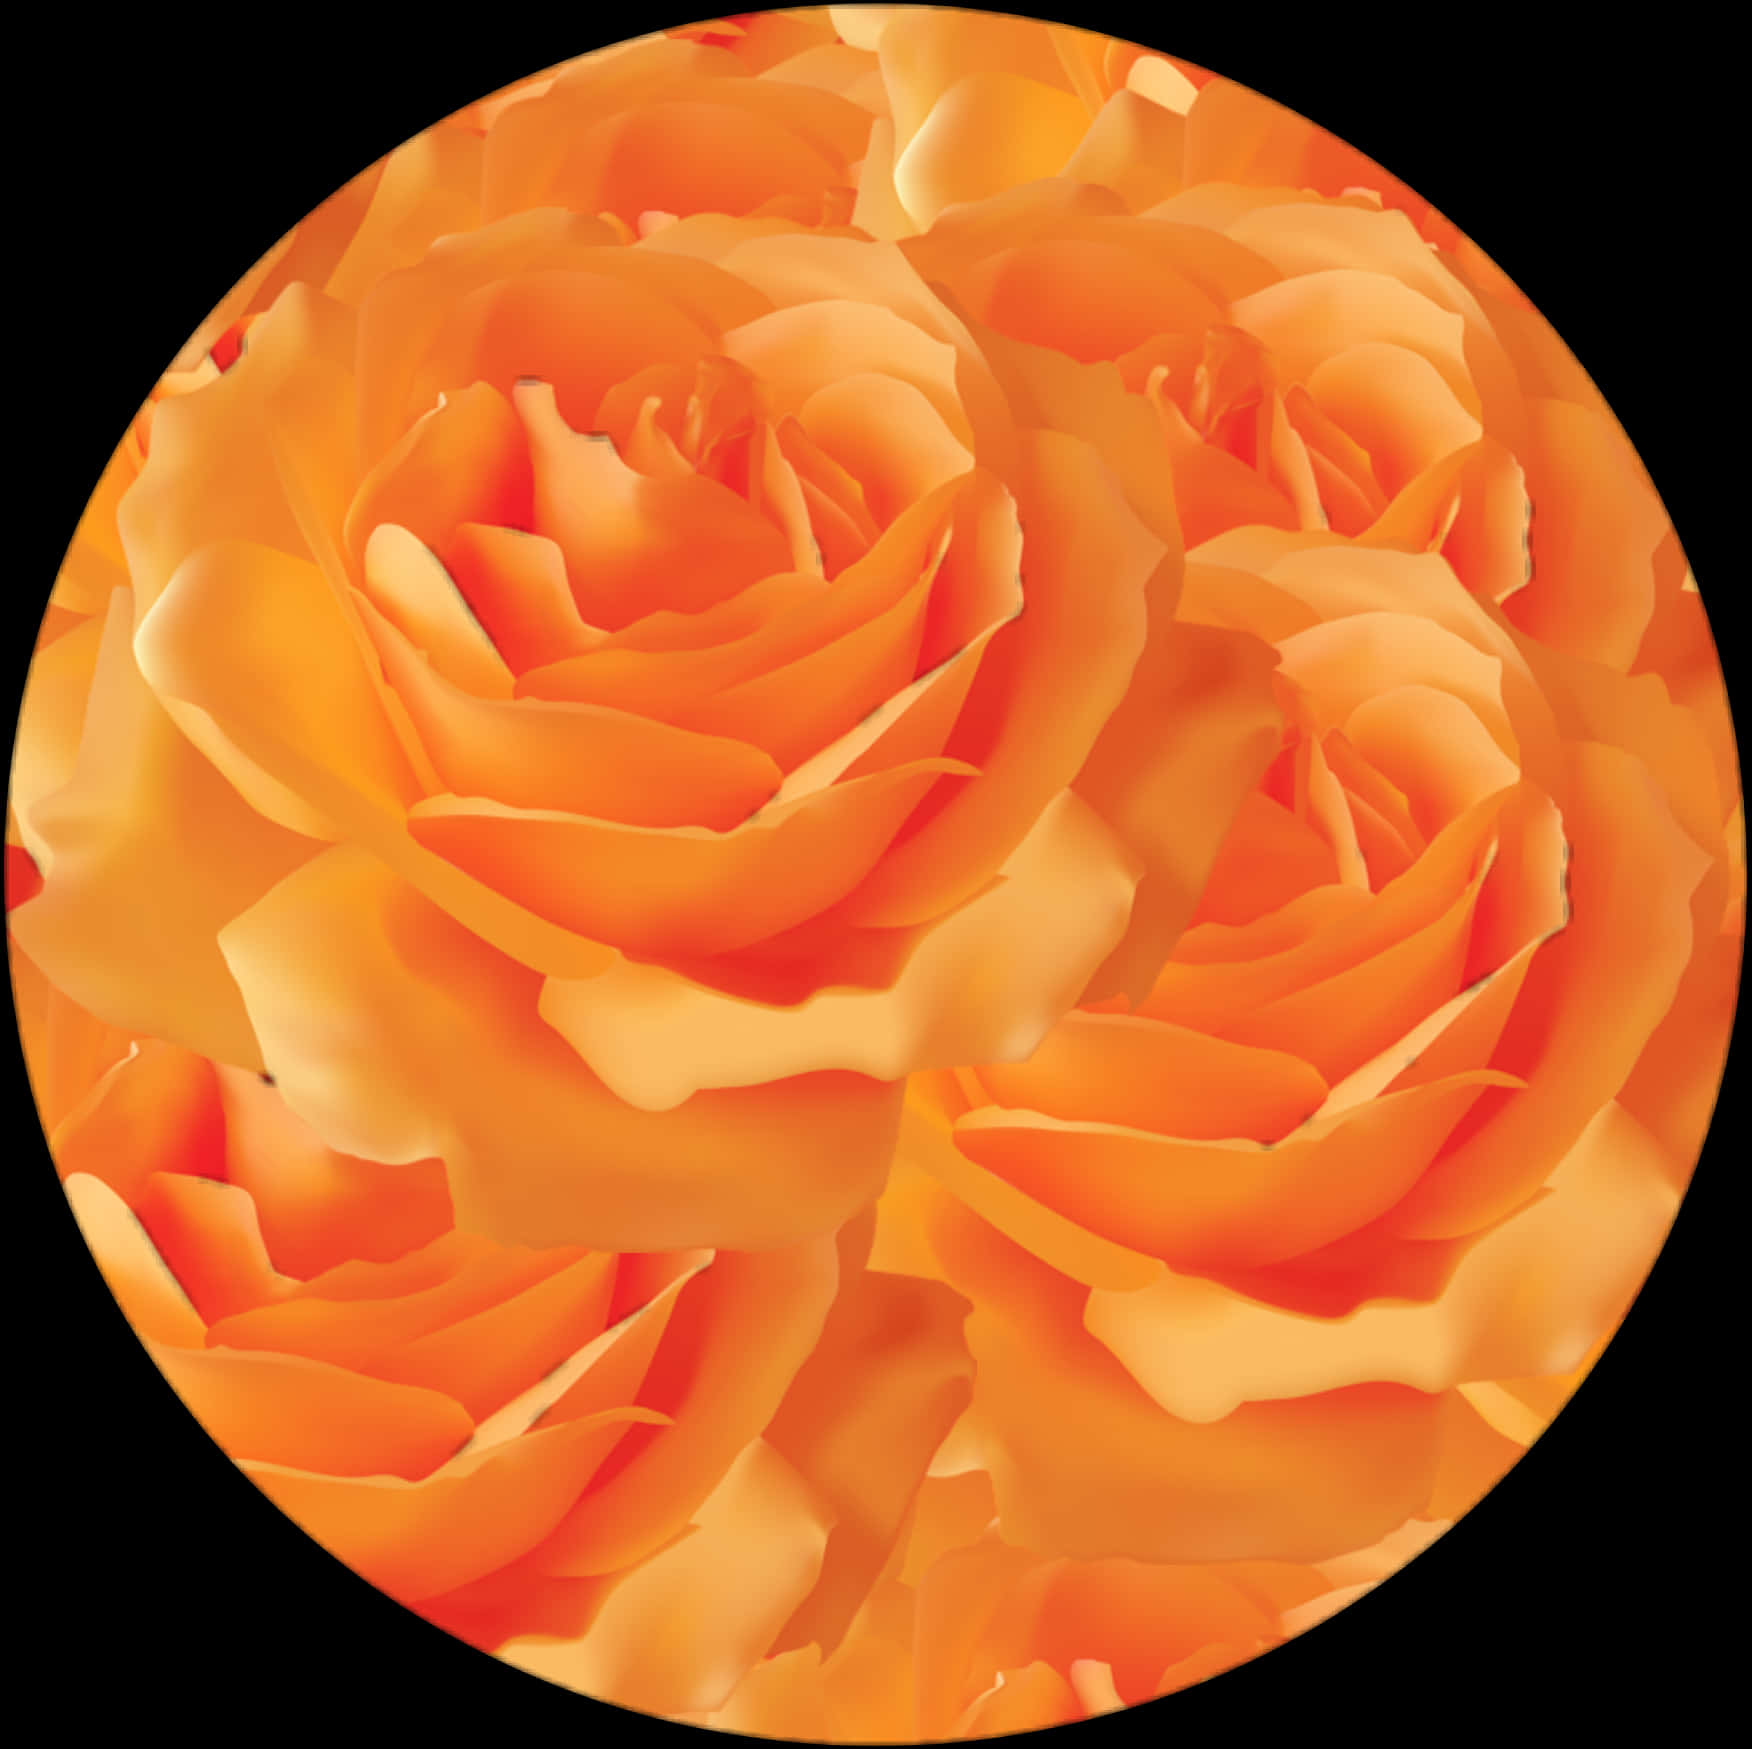 A Group Of Orange Roses